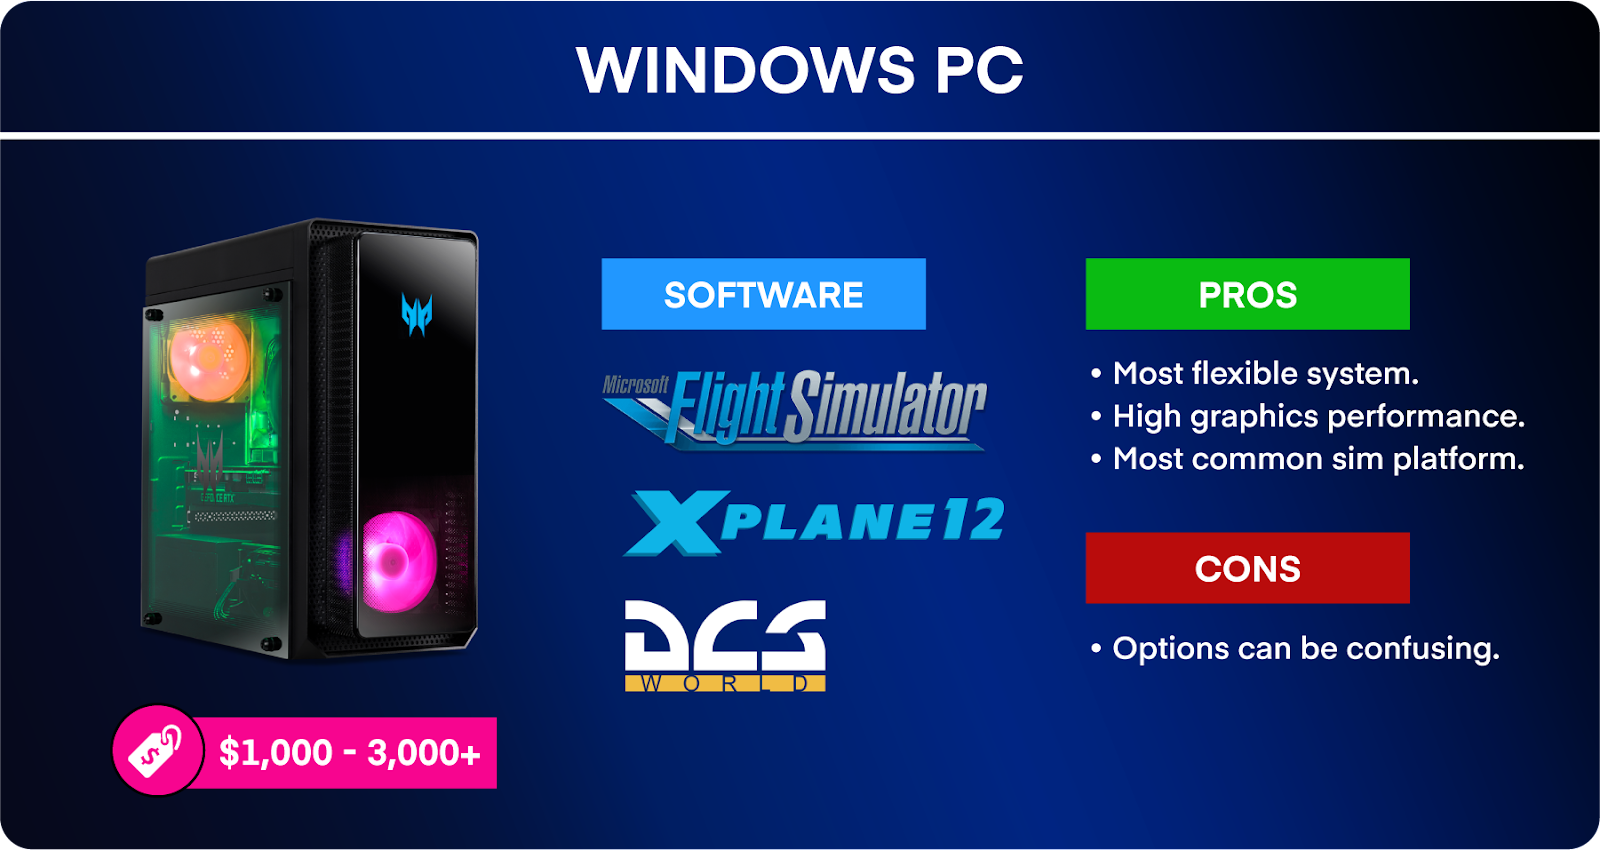 Windows PC infographic, listing sim software, price range, pros, and cons.